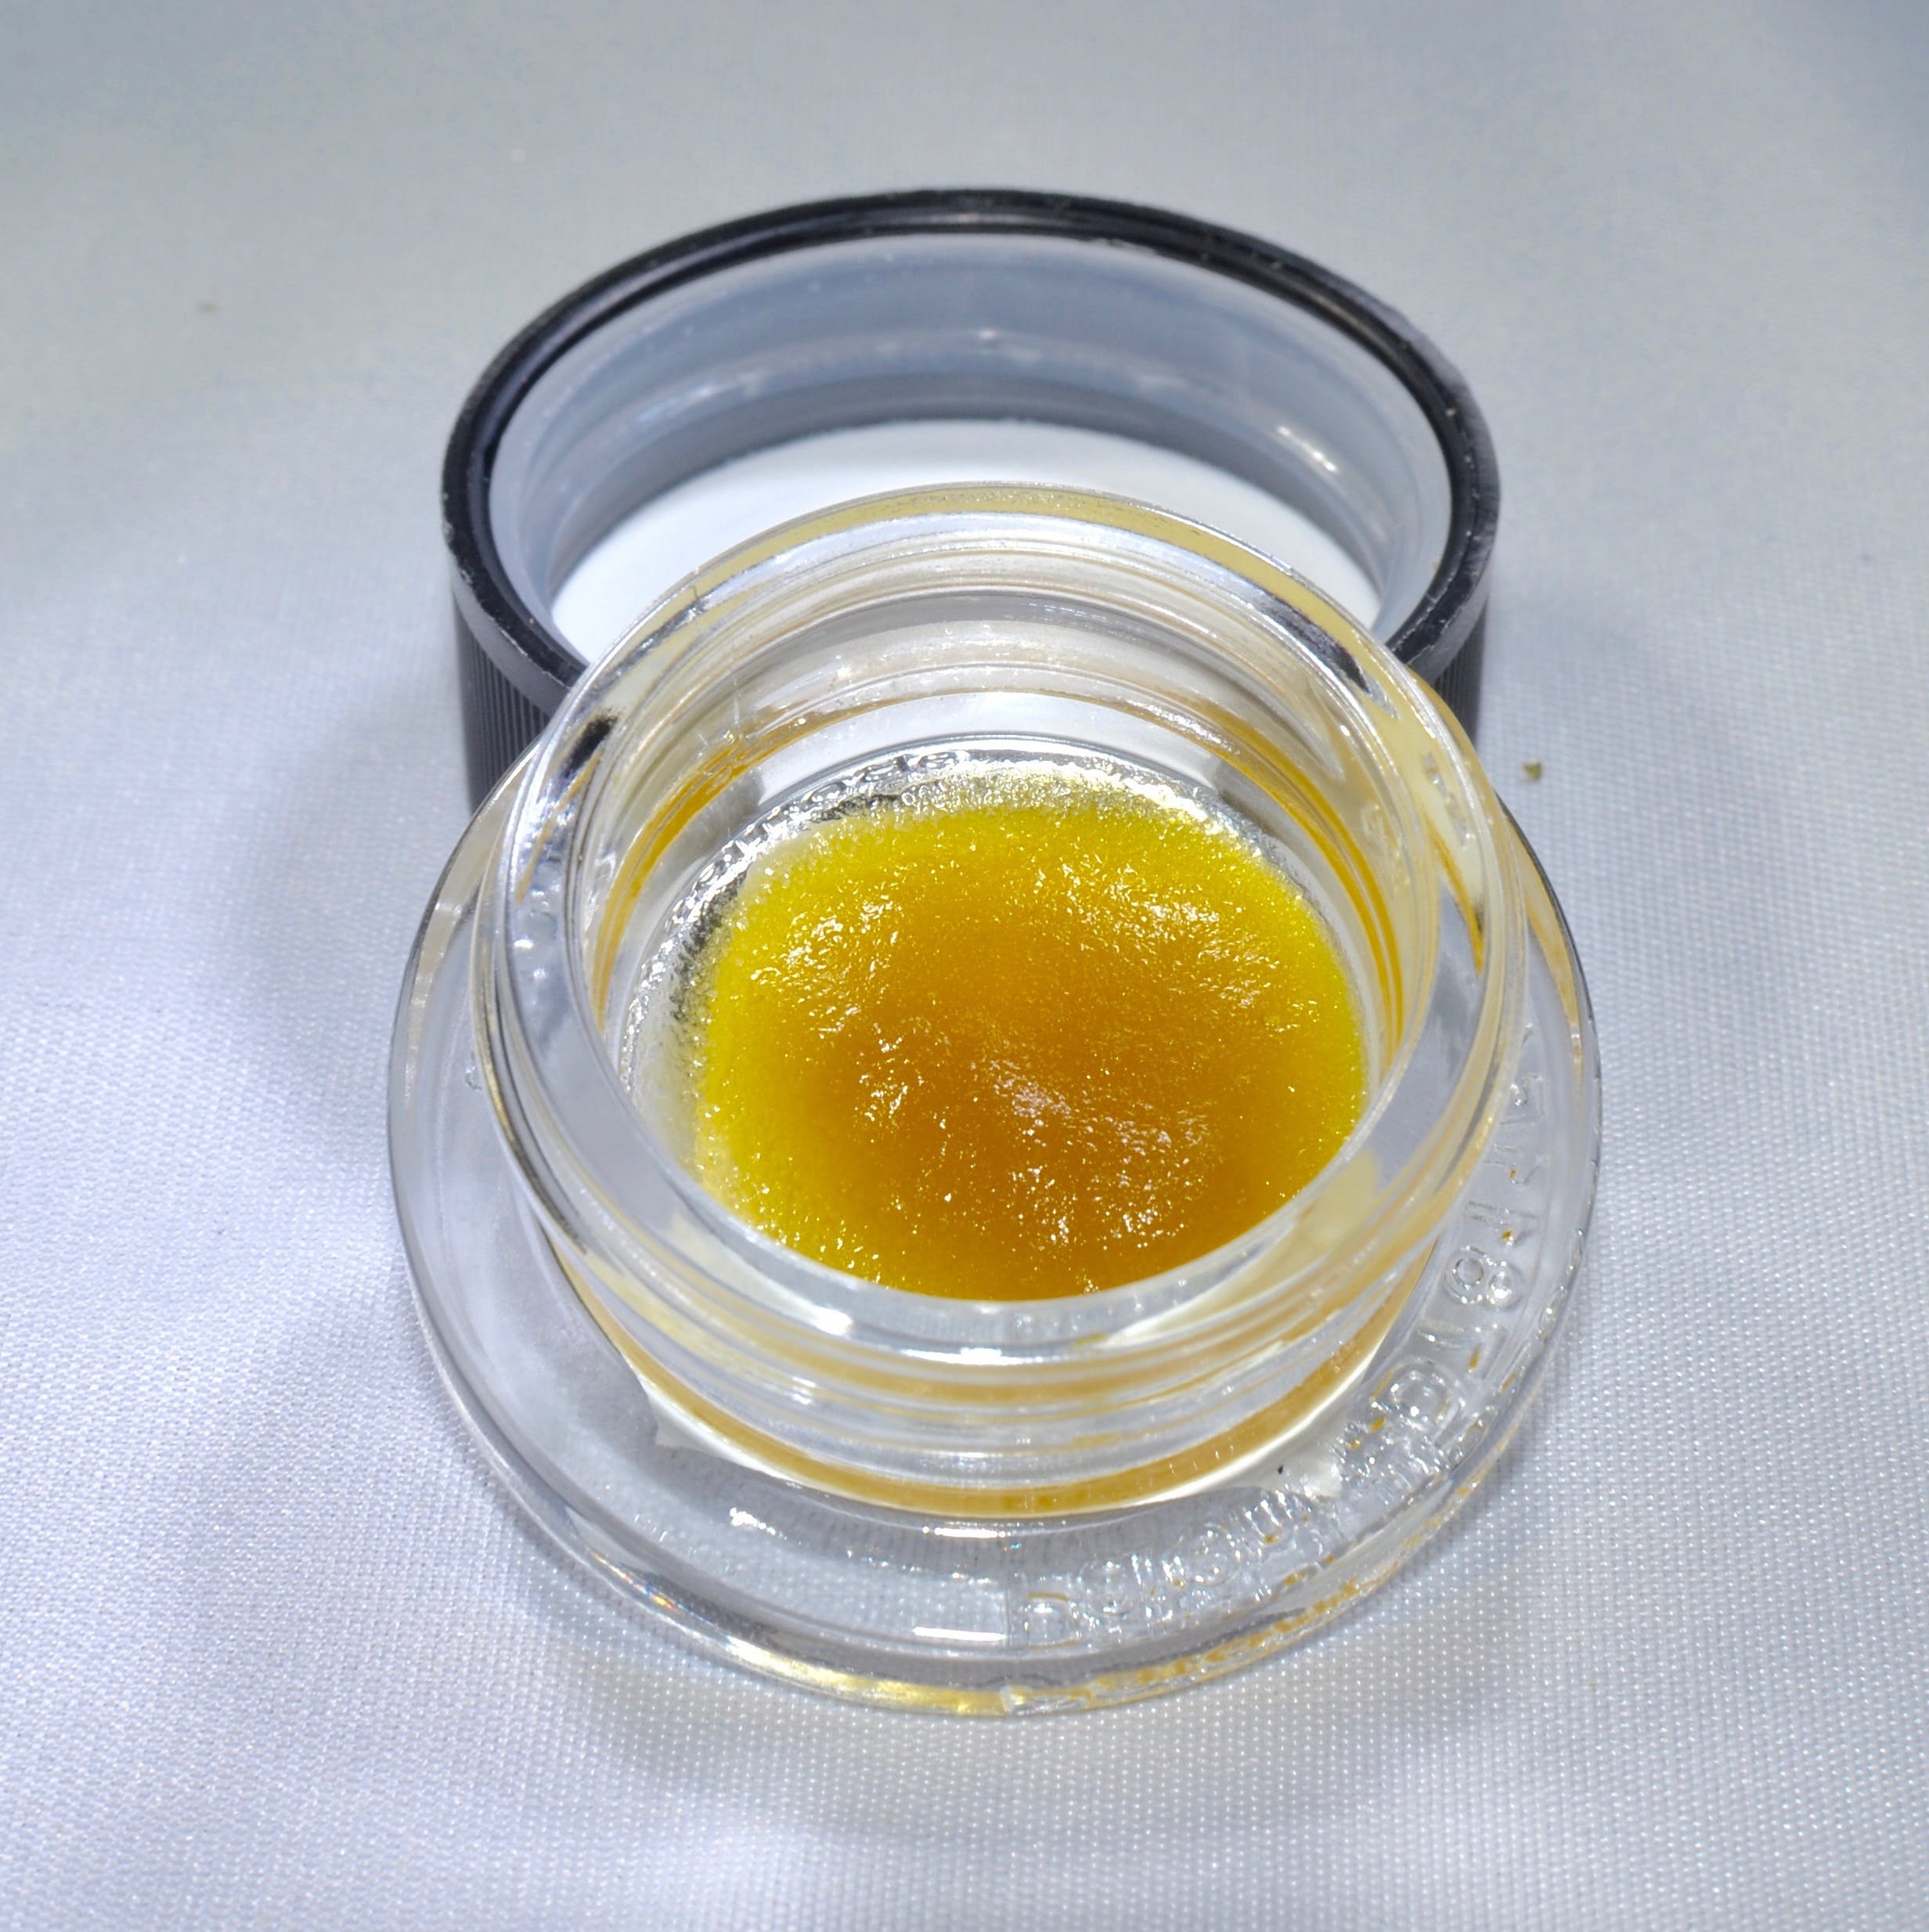 concentrate-hci-live-resin-thing-231